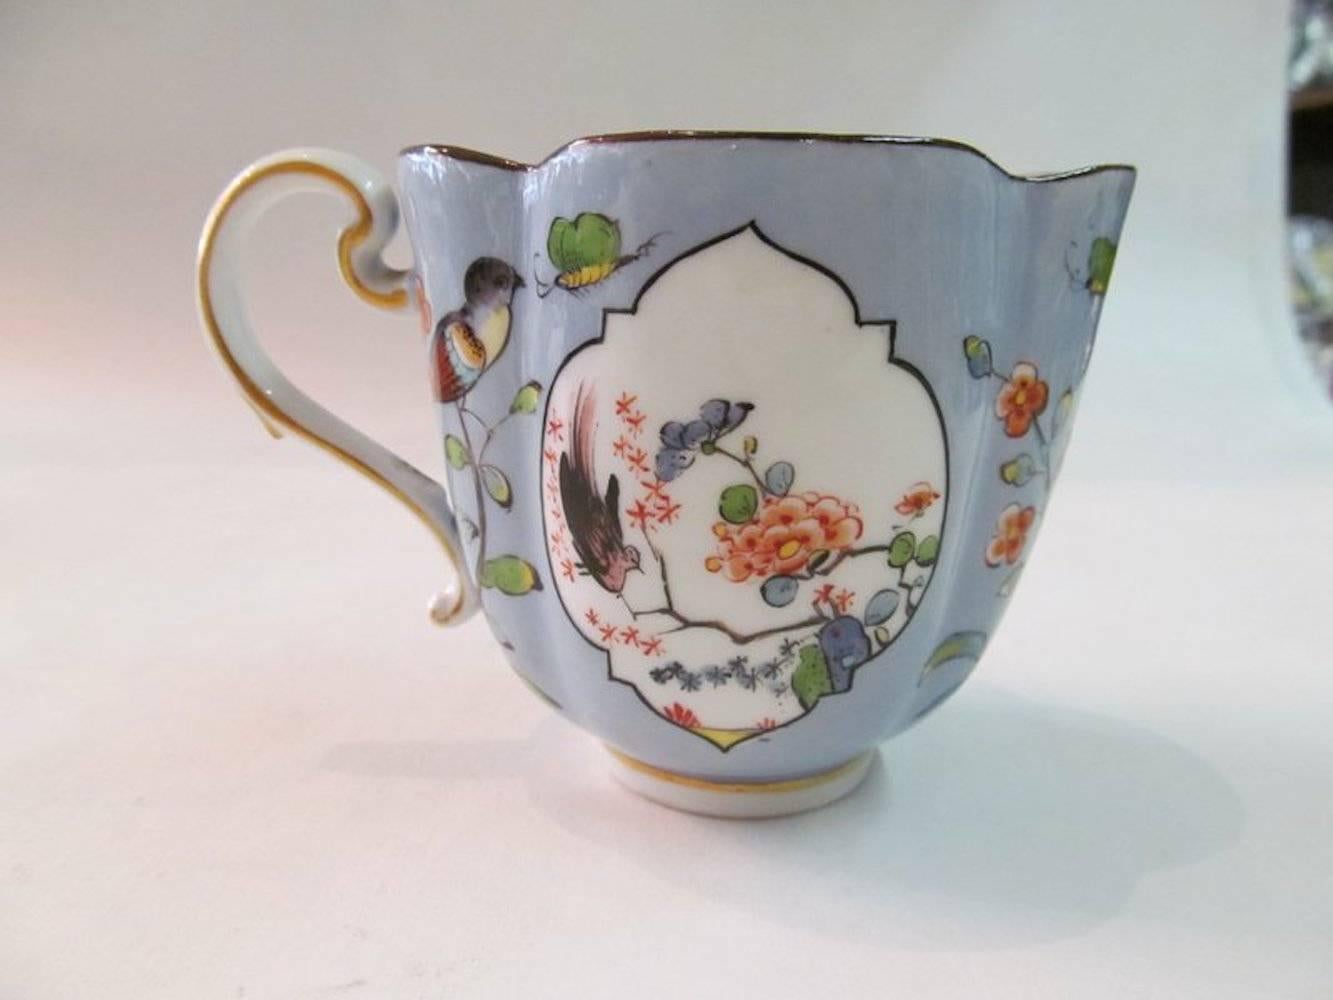 Chinese Export Antique 18th Century Meissen Hand-Painted Porcelain Kaikemon Cup & Saucer